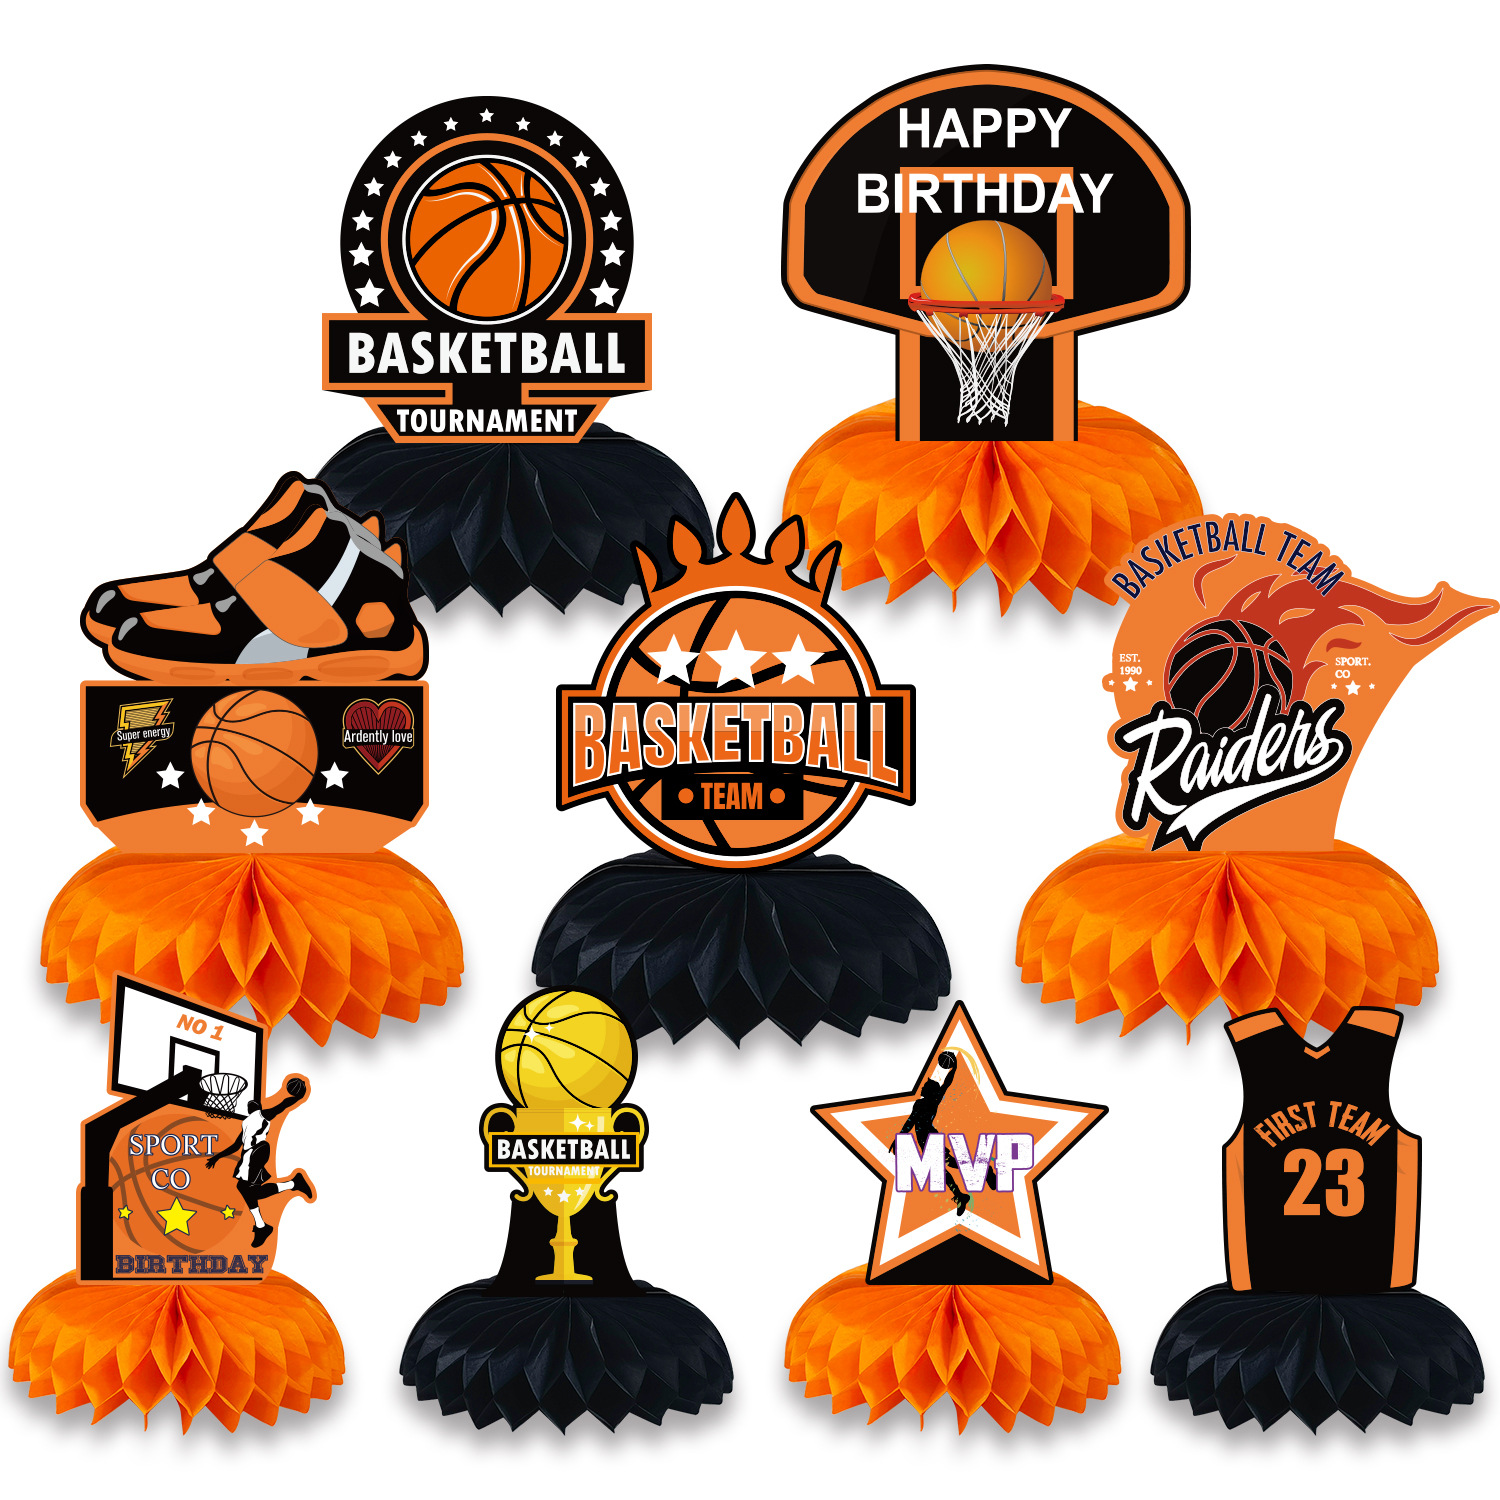 Basketball Theme Birthday Party Decoration Supplies Honeycomb Table Table Decorative Ornament Party Honeycomb Table Decoration